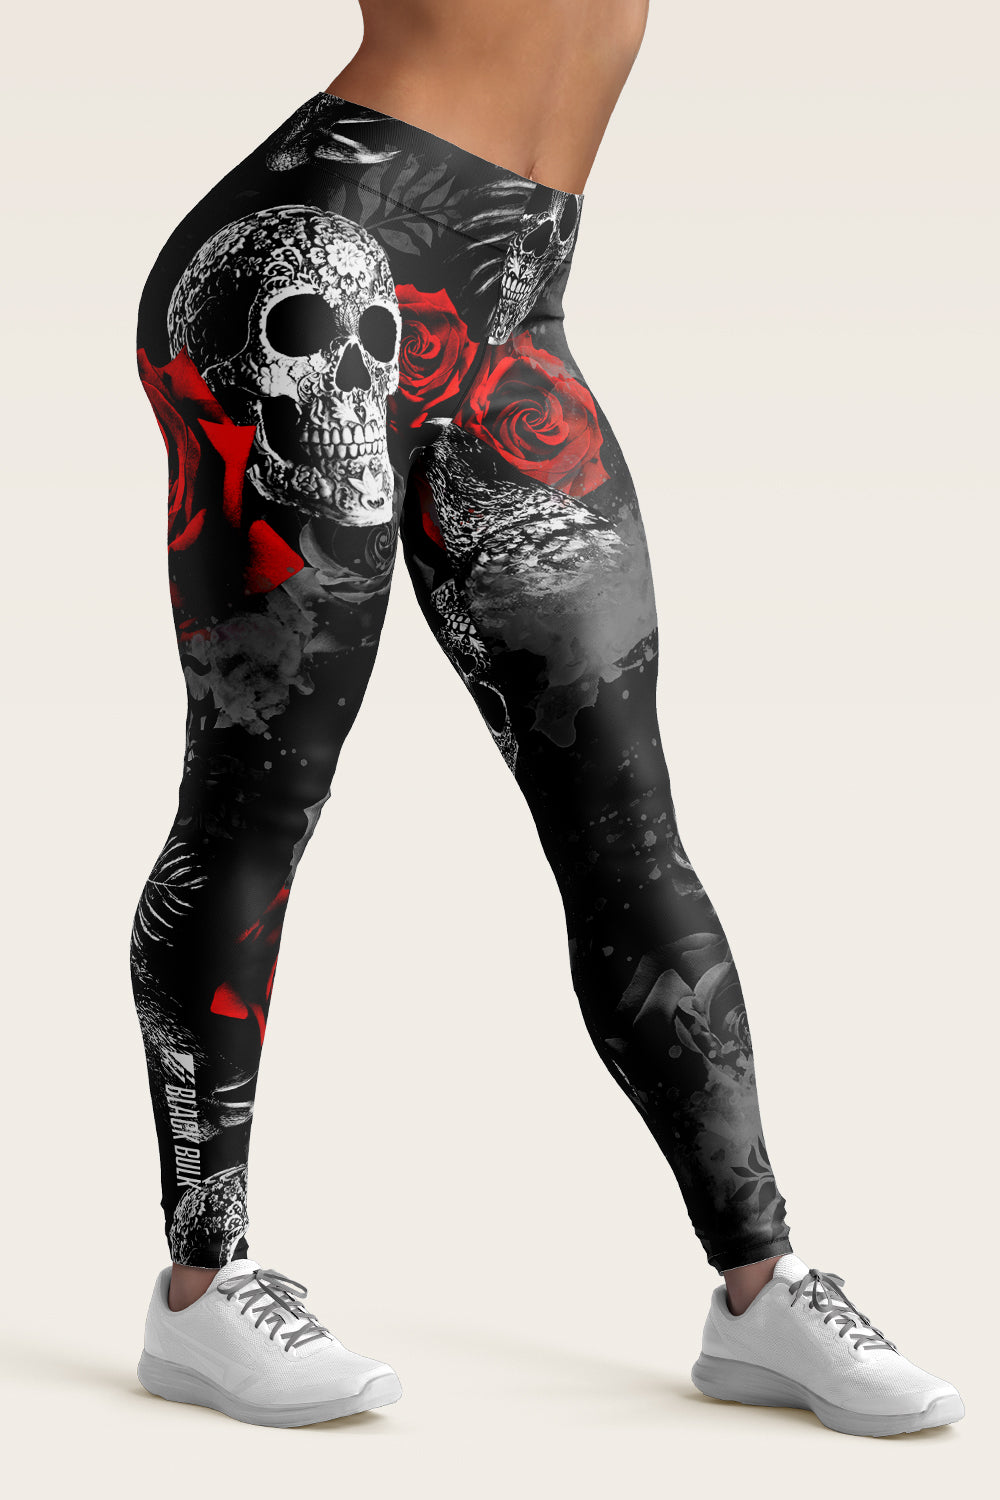 Skull And Beauty Red Rose Hollow Tank Top And Legging 3D Art